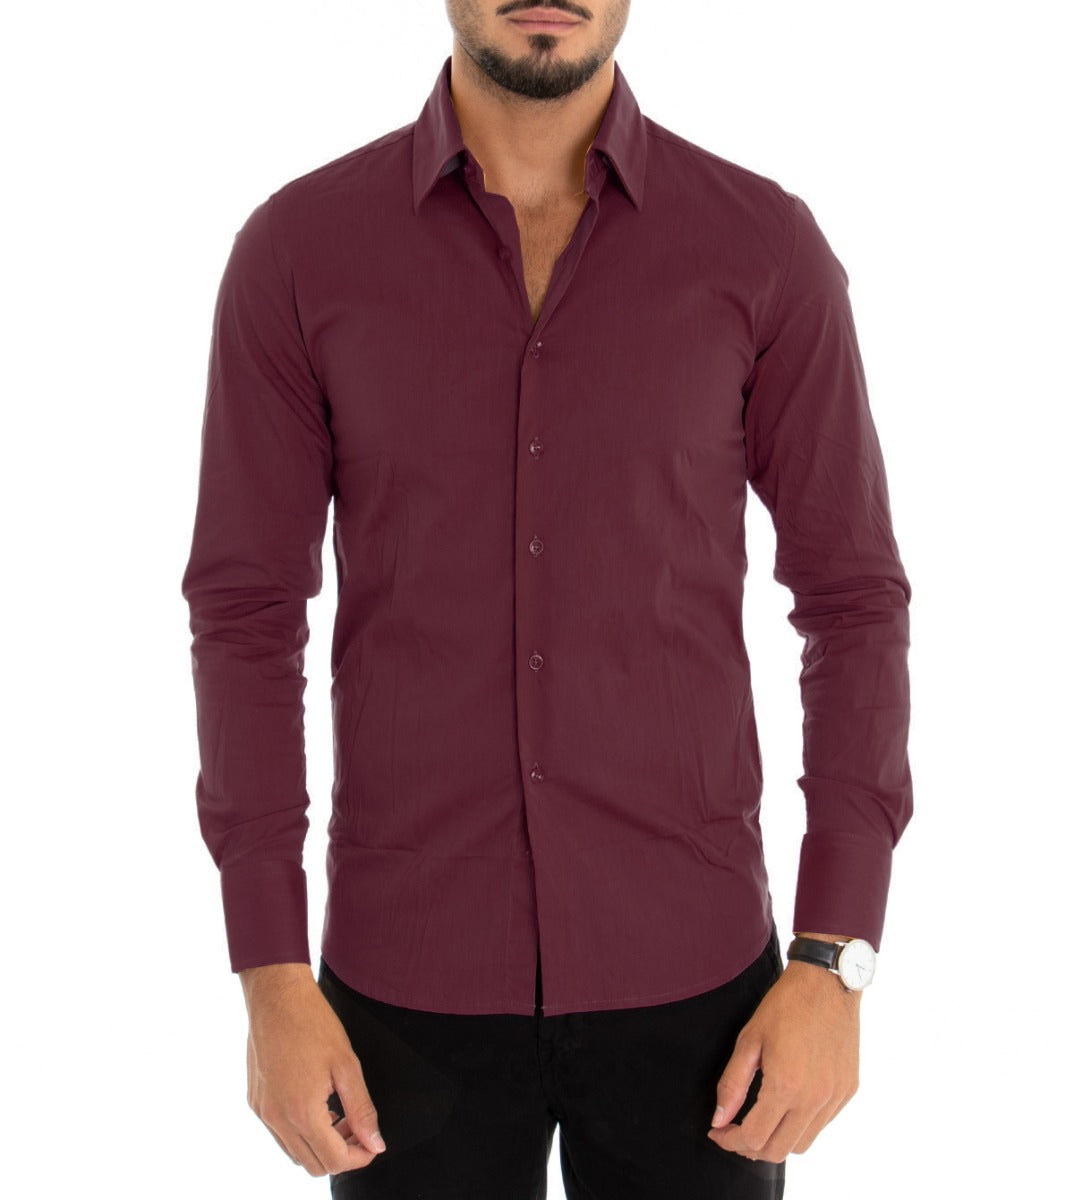 Men's Shirt With Collar Long Sleeve Slim Fit Basic Casual Cotton Burgundy GIOSAL-C1814A